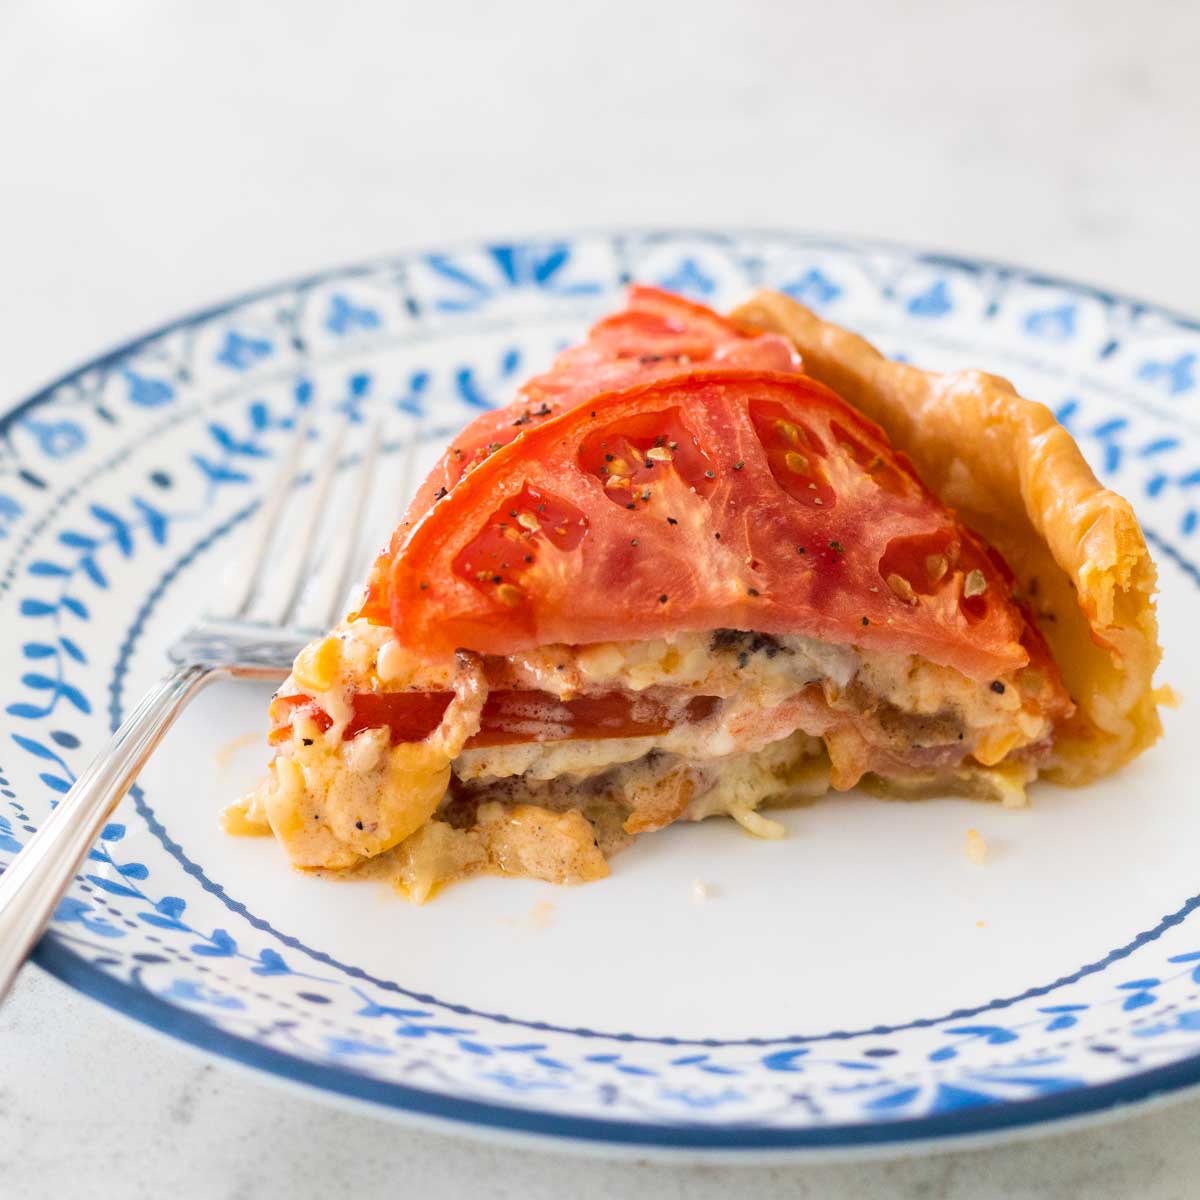 A slice of tomato pie is on a blue and white plate. You can see the layers of melted cheese and tomato slices.